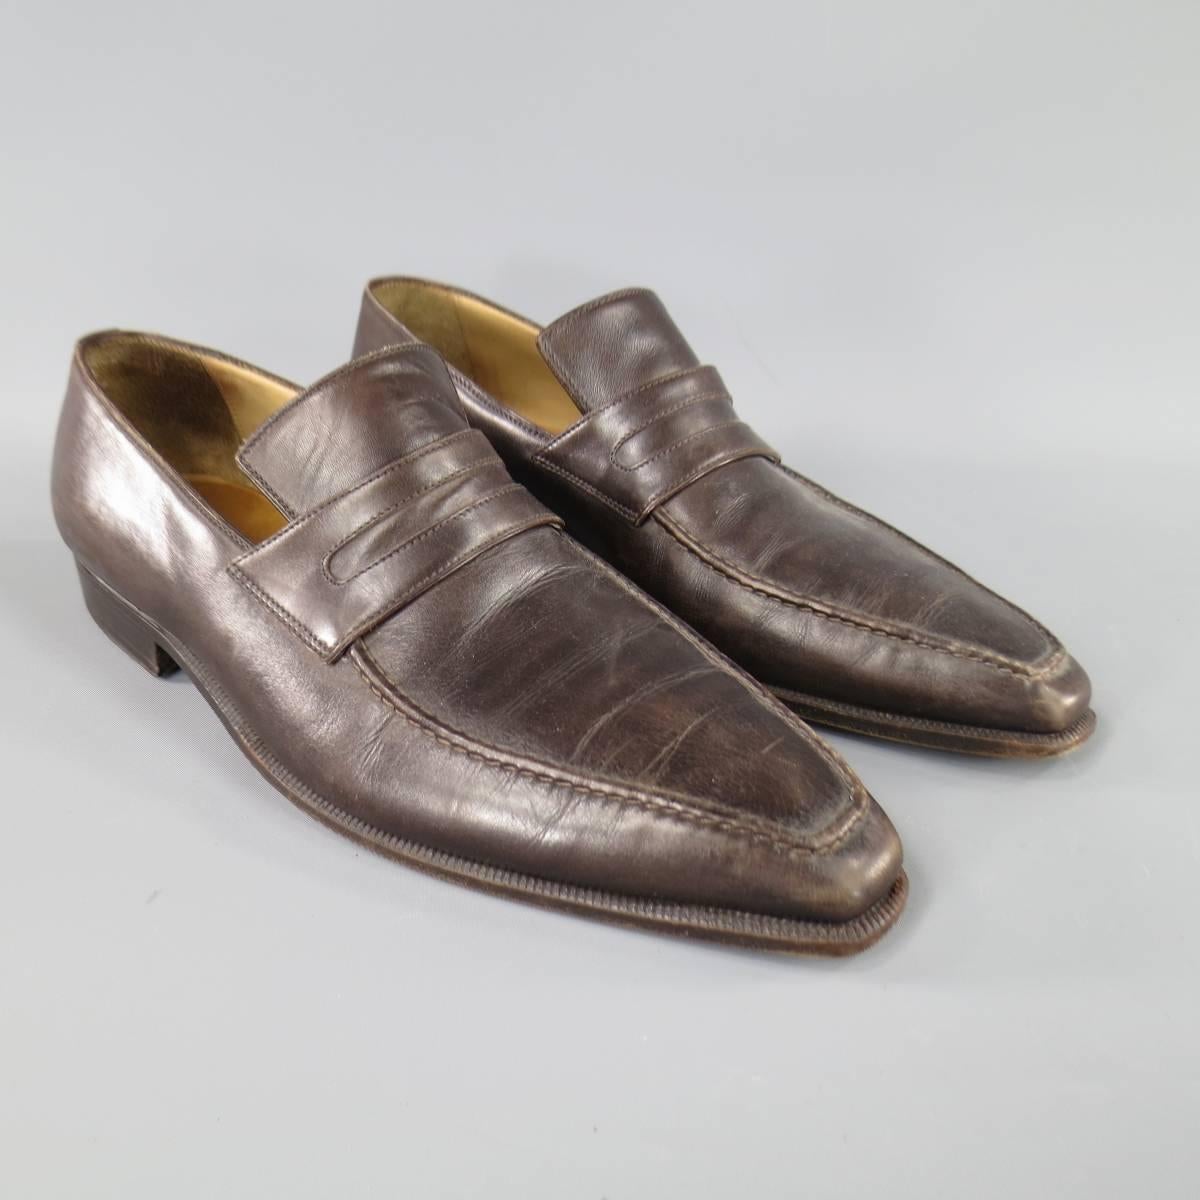 These classic BRIONI penny loafers come in a rich chocolate brown leather with a squared pointed toe and top stitch detail. Made in Italy.
 
Good Pre-Owned Condition.
Marked: 10
 
12.25 in X 4 in.